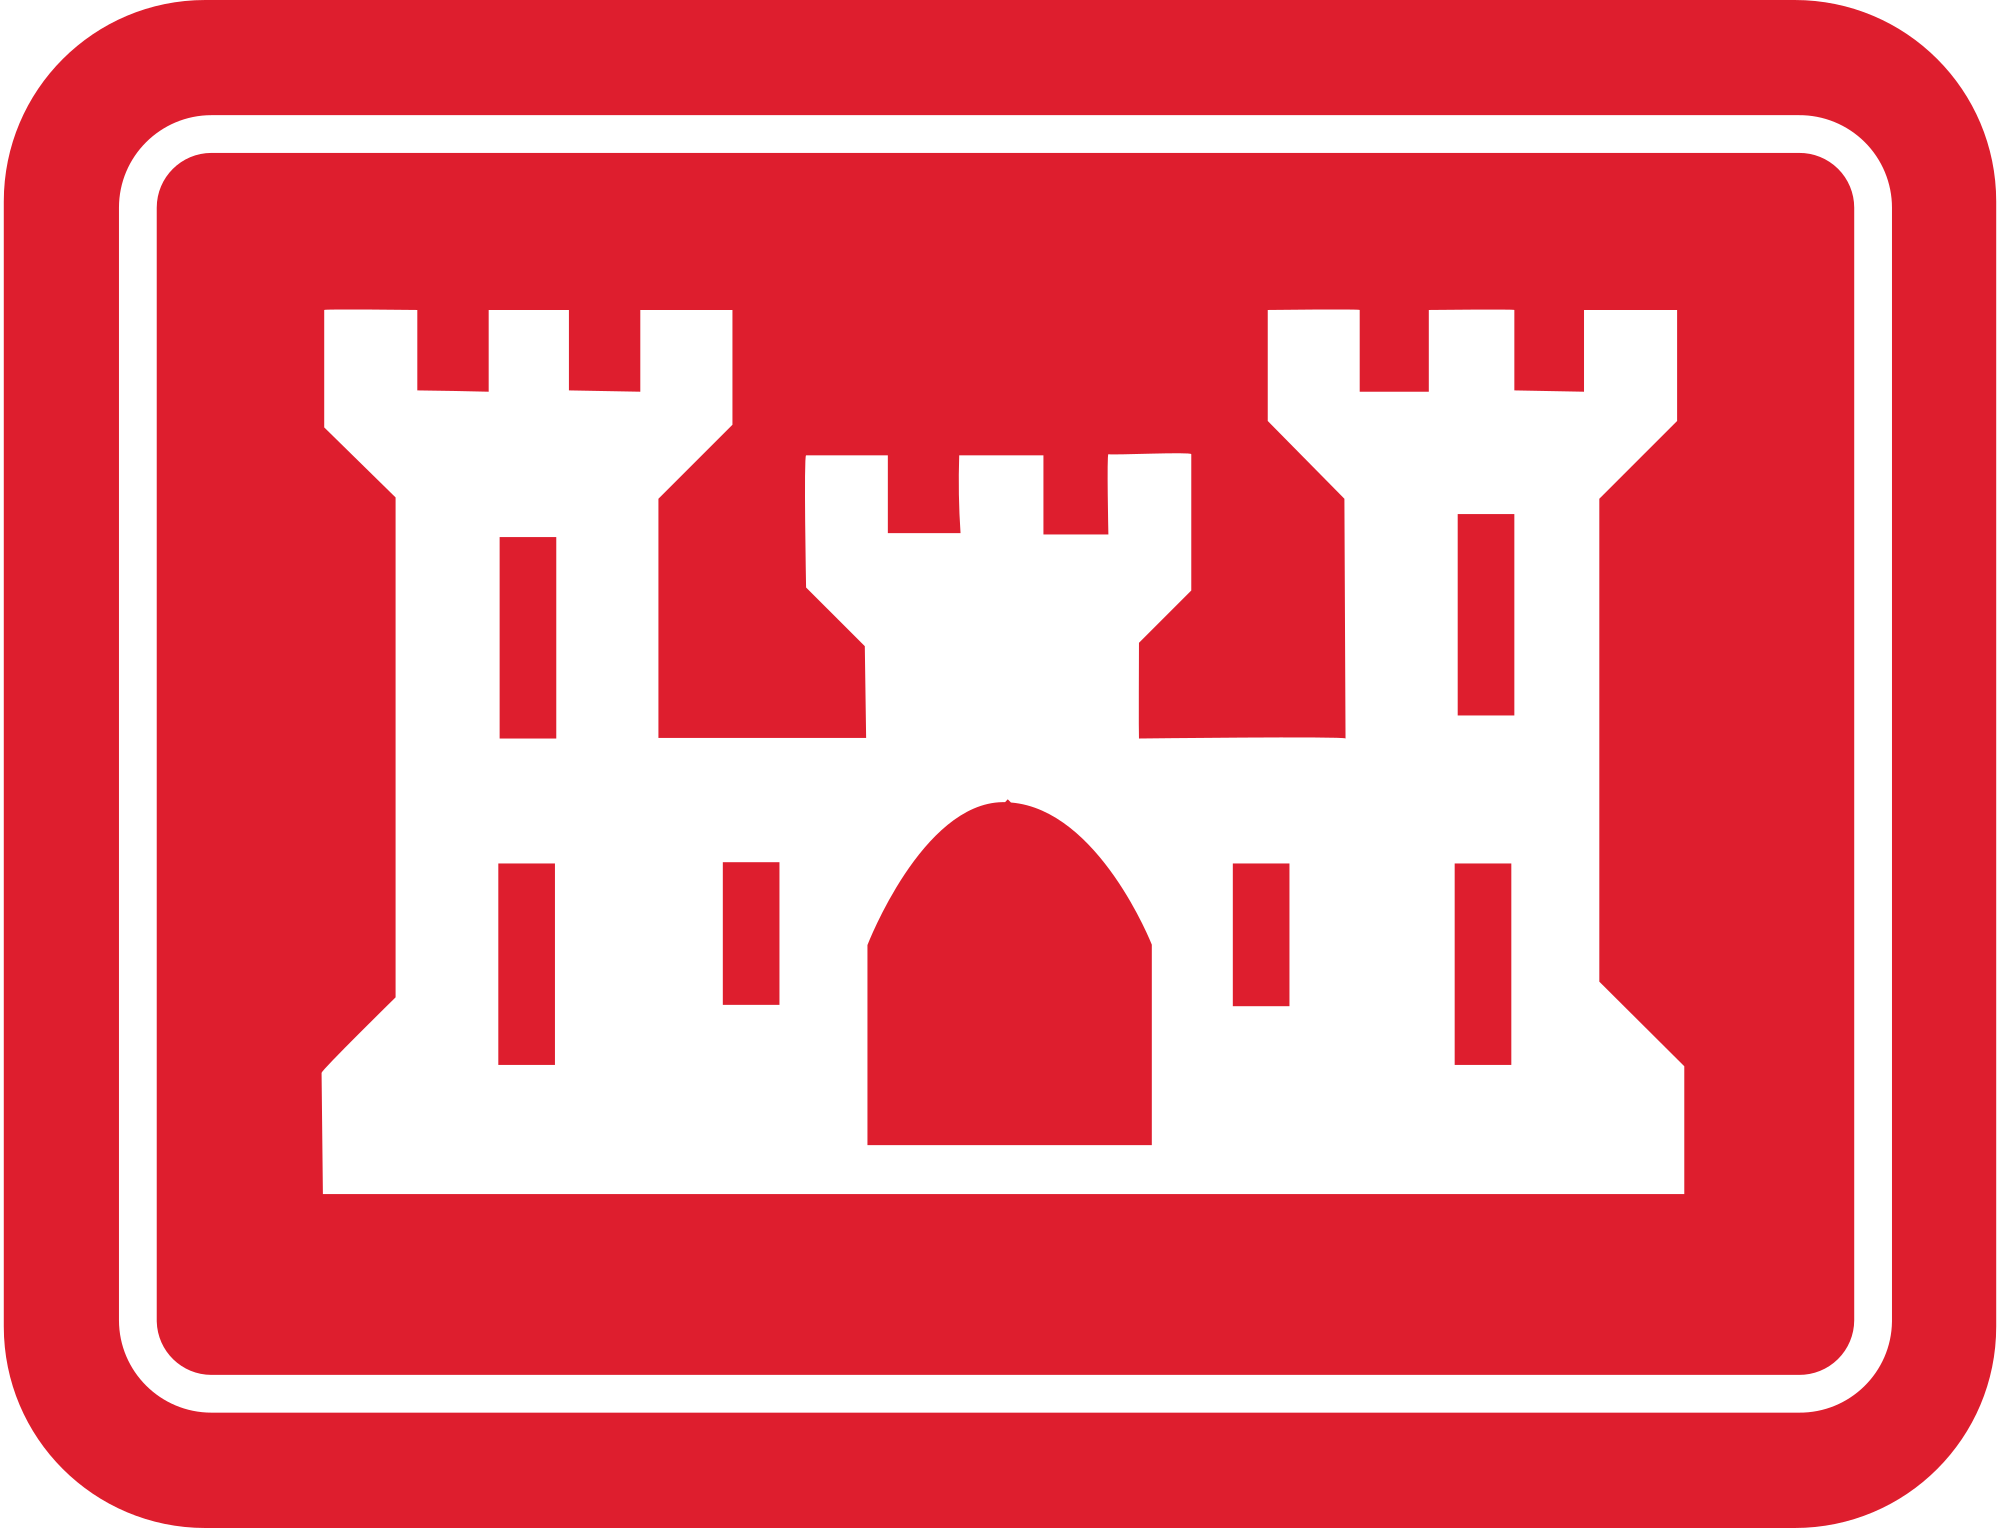 United States Army Corps of Engineers.